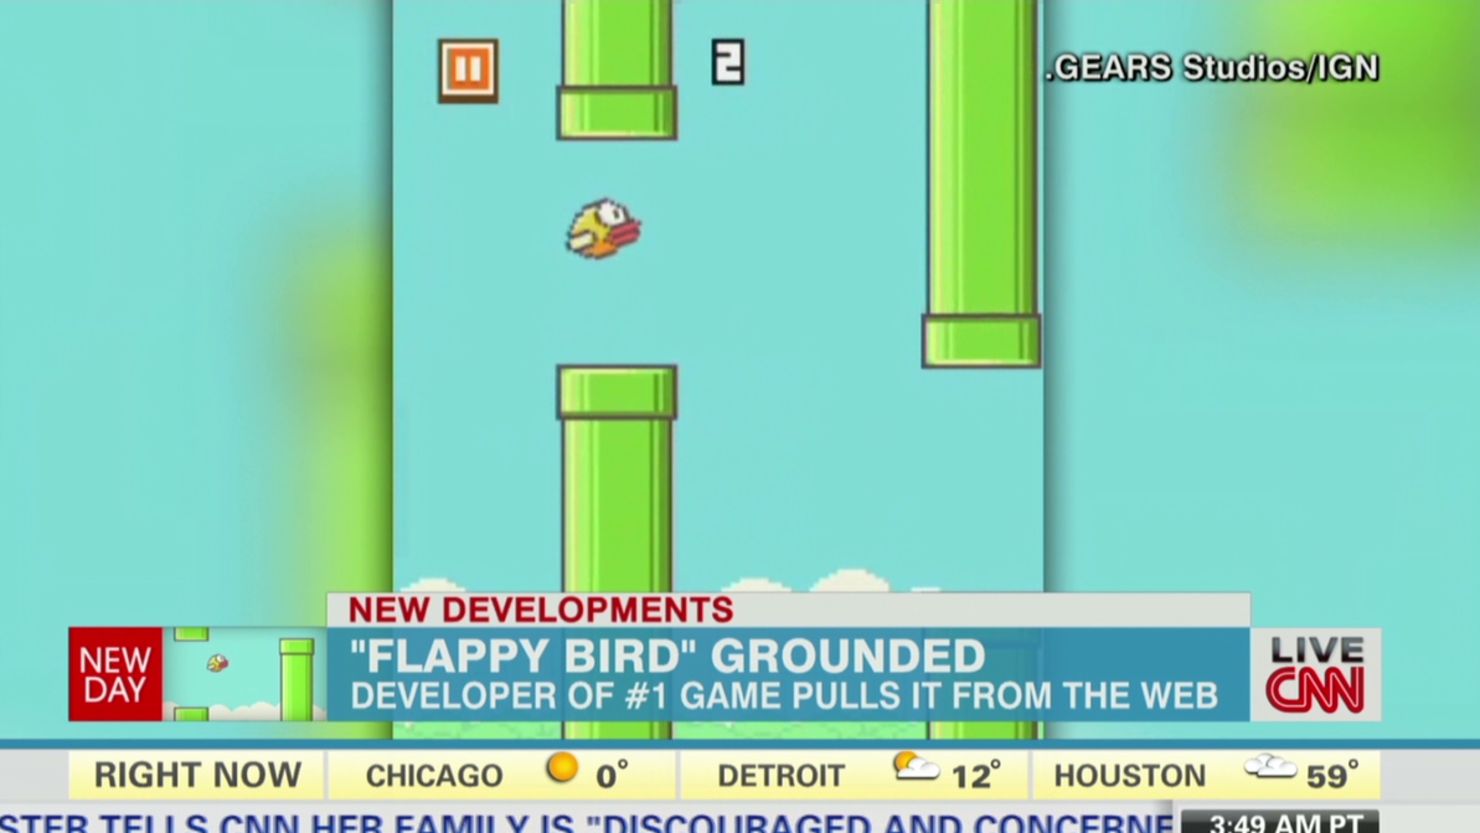 The creator of "Flappy Bird" told a Twitter follower he plans to release the game again.